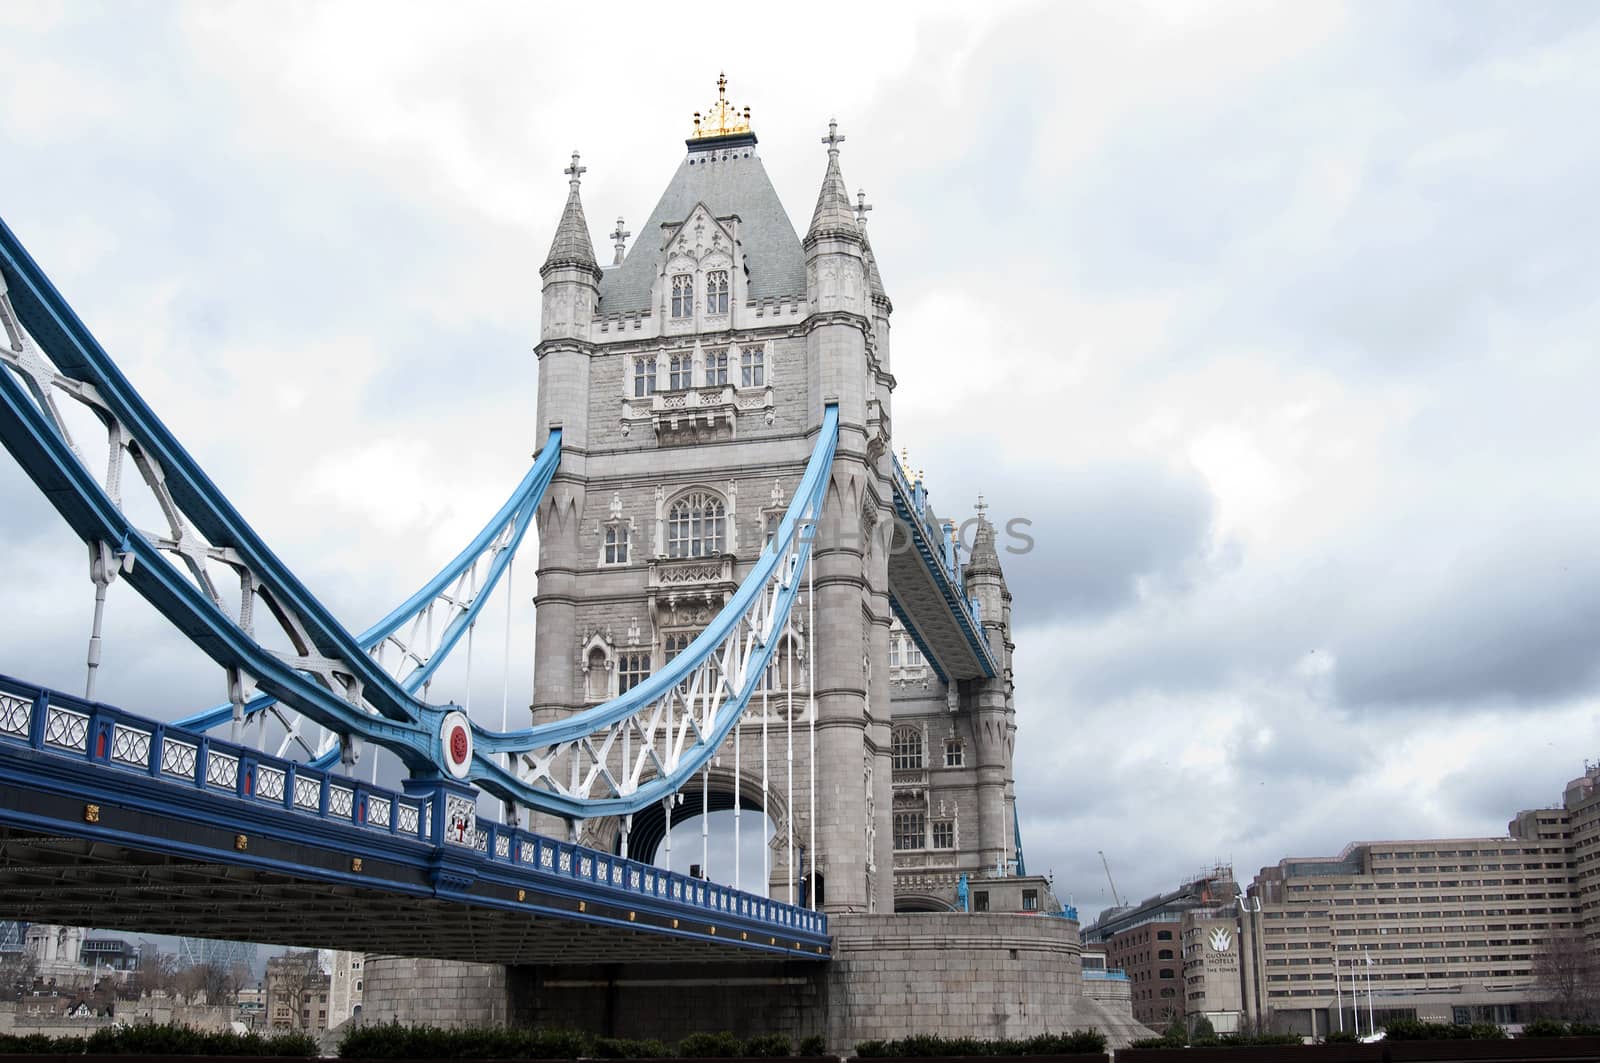 Tower Bridge (built 1886–1894) is a combined bascule and suspension bridge in London which crosses the River Thames. It is close to the Tower of London, from which it takes its name, and has become an iconic symbol of London.